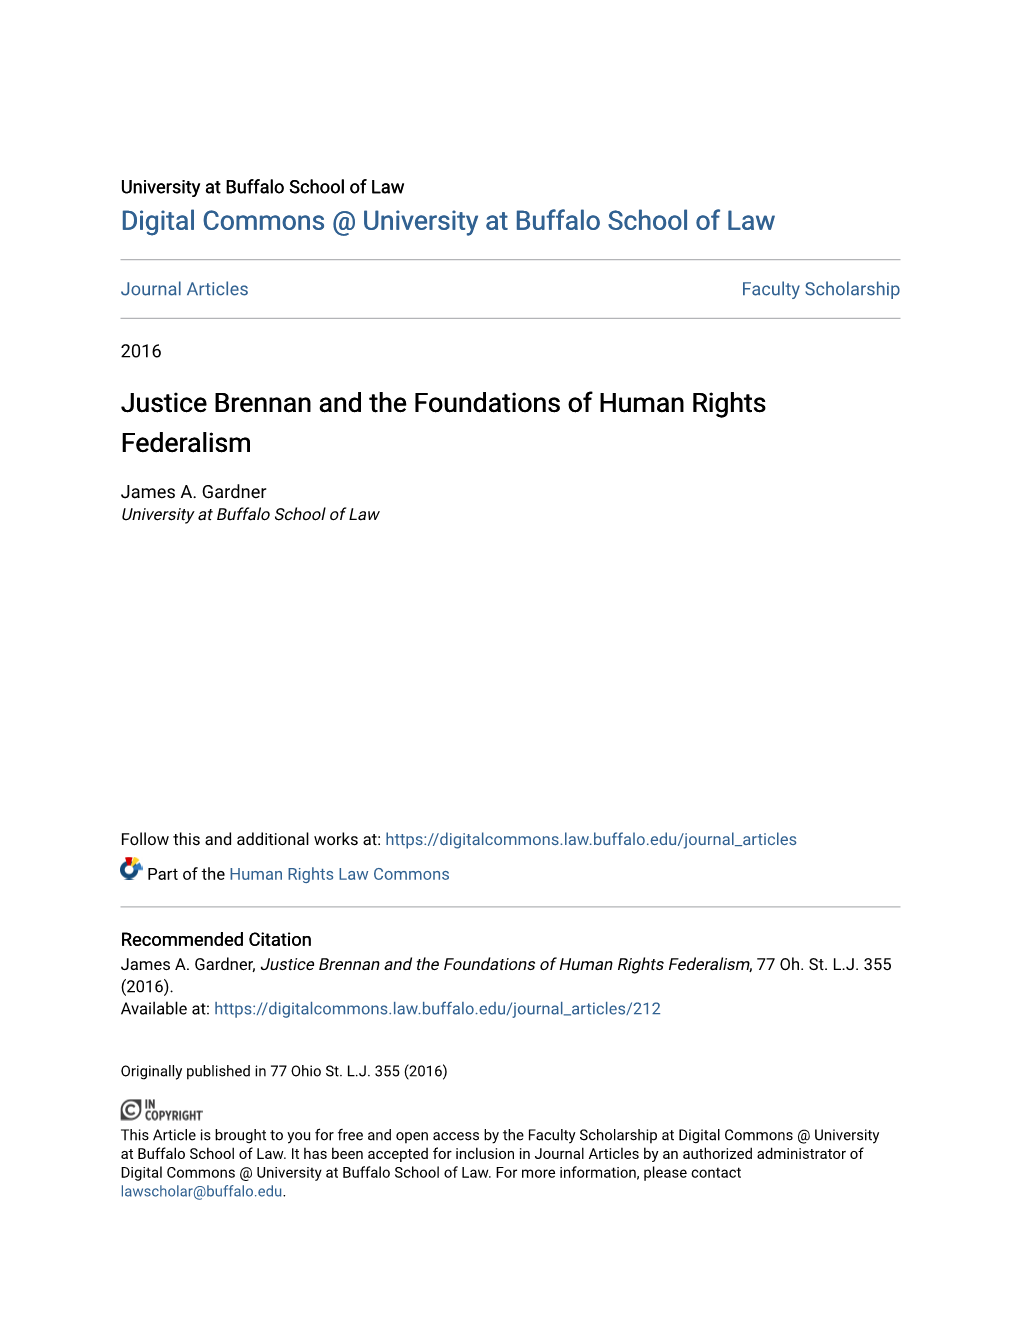 Justice Brennan and the Foundations of Human Rights Federalism